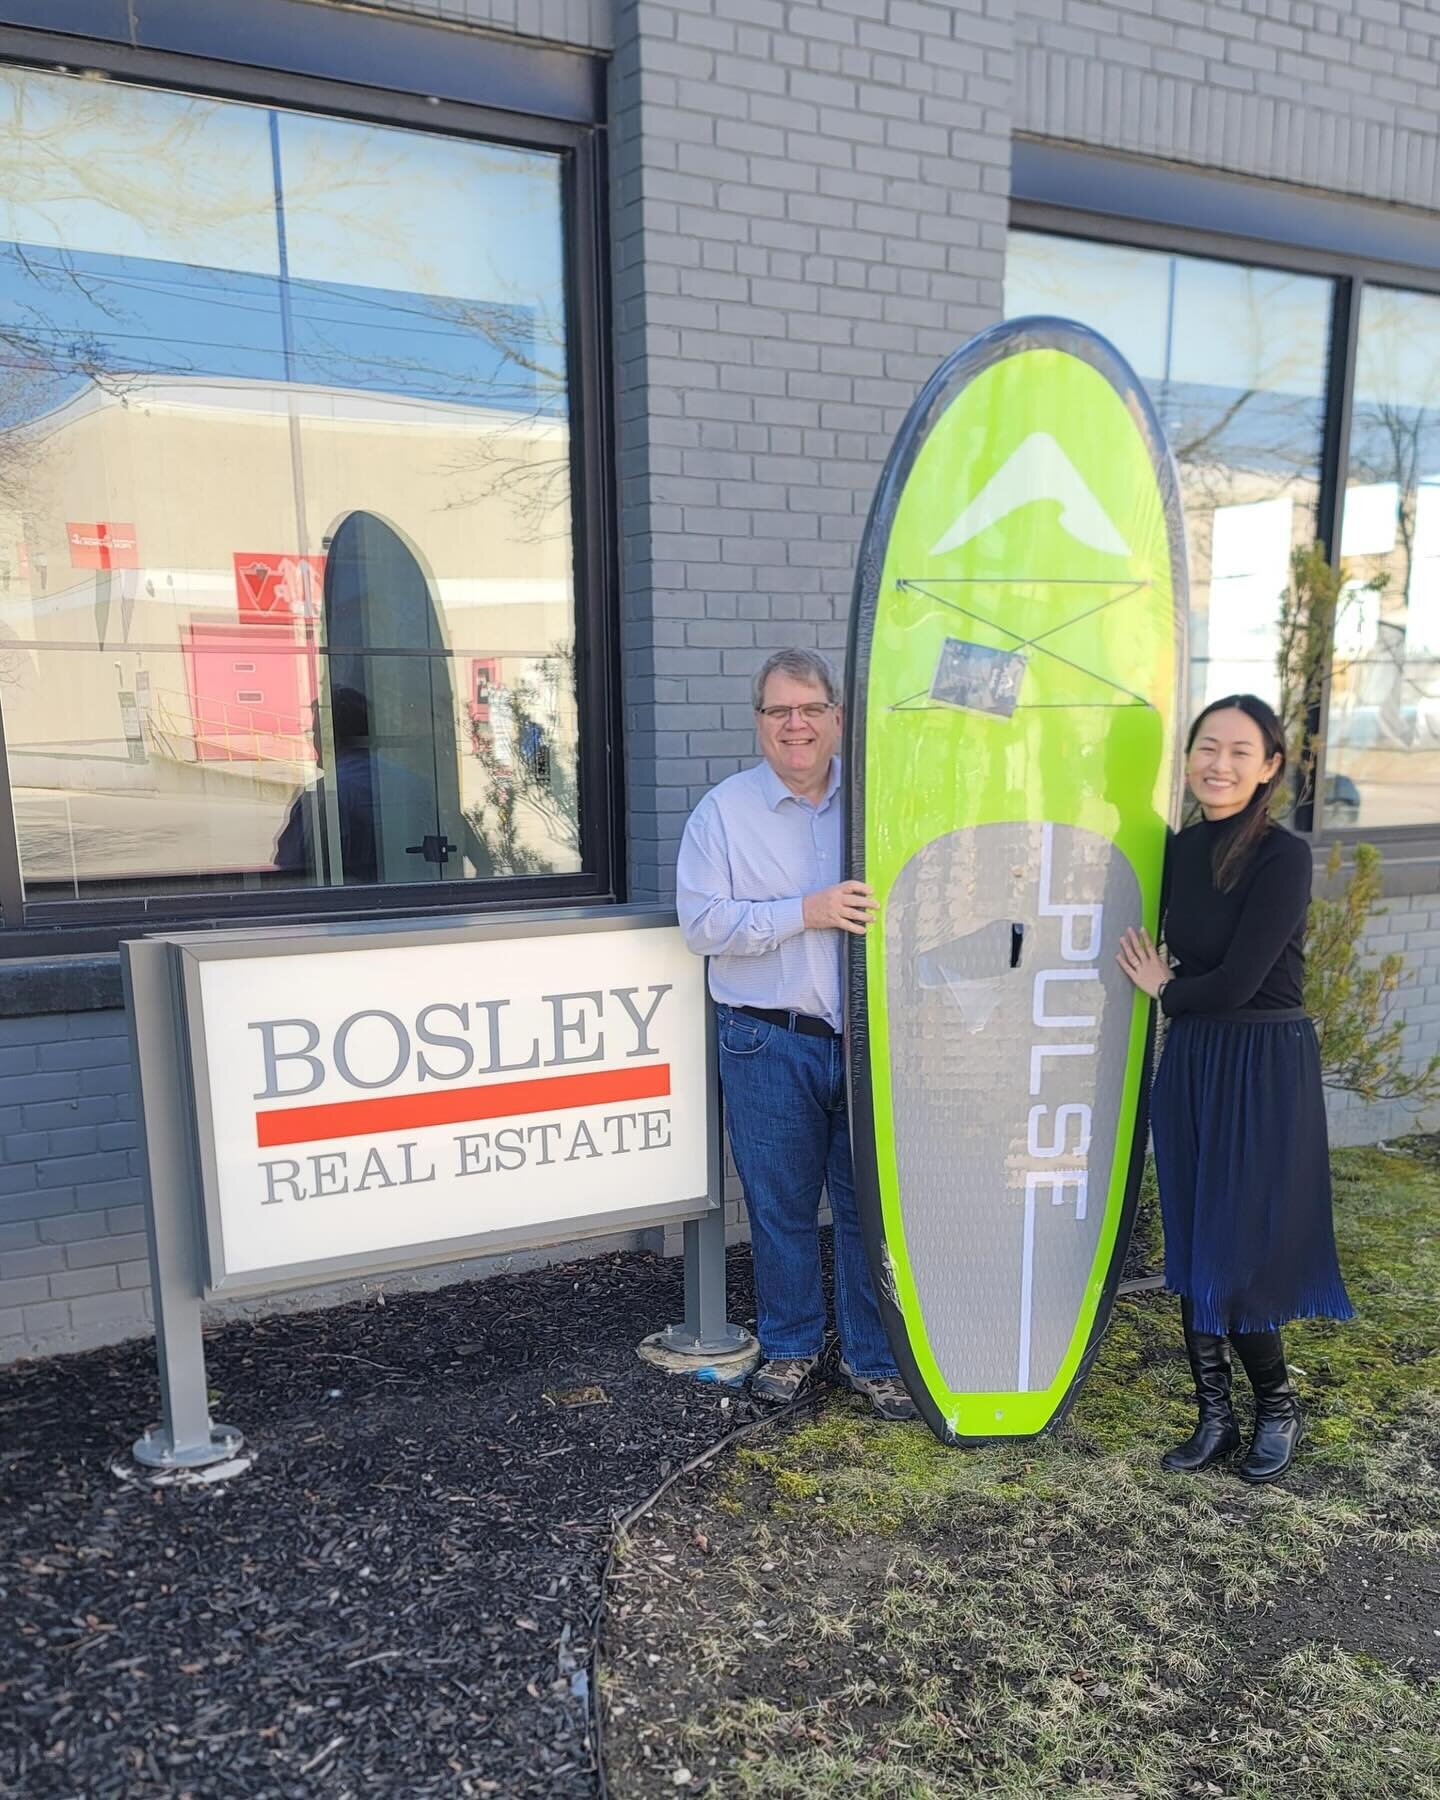 Congratulations to Bosley Real Estate&rsquo;s grand prize random draw winner at the Spring Cottage Life Show! 🏖️

It was an absolute pleasure connecting with all the show attendees, sharing our knowledge, showcasing our listings and most importantly